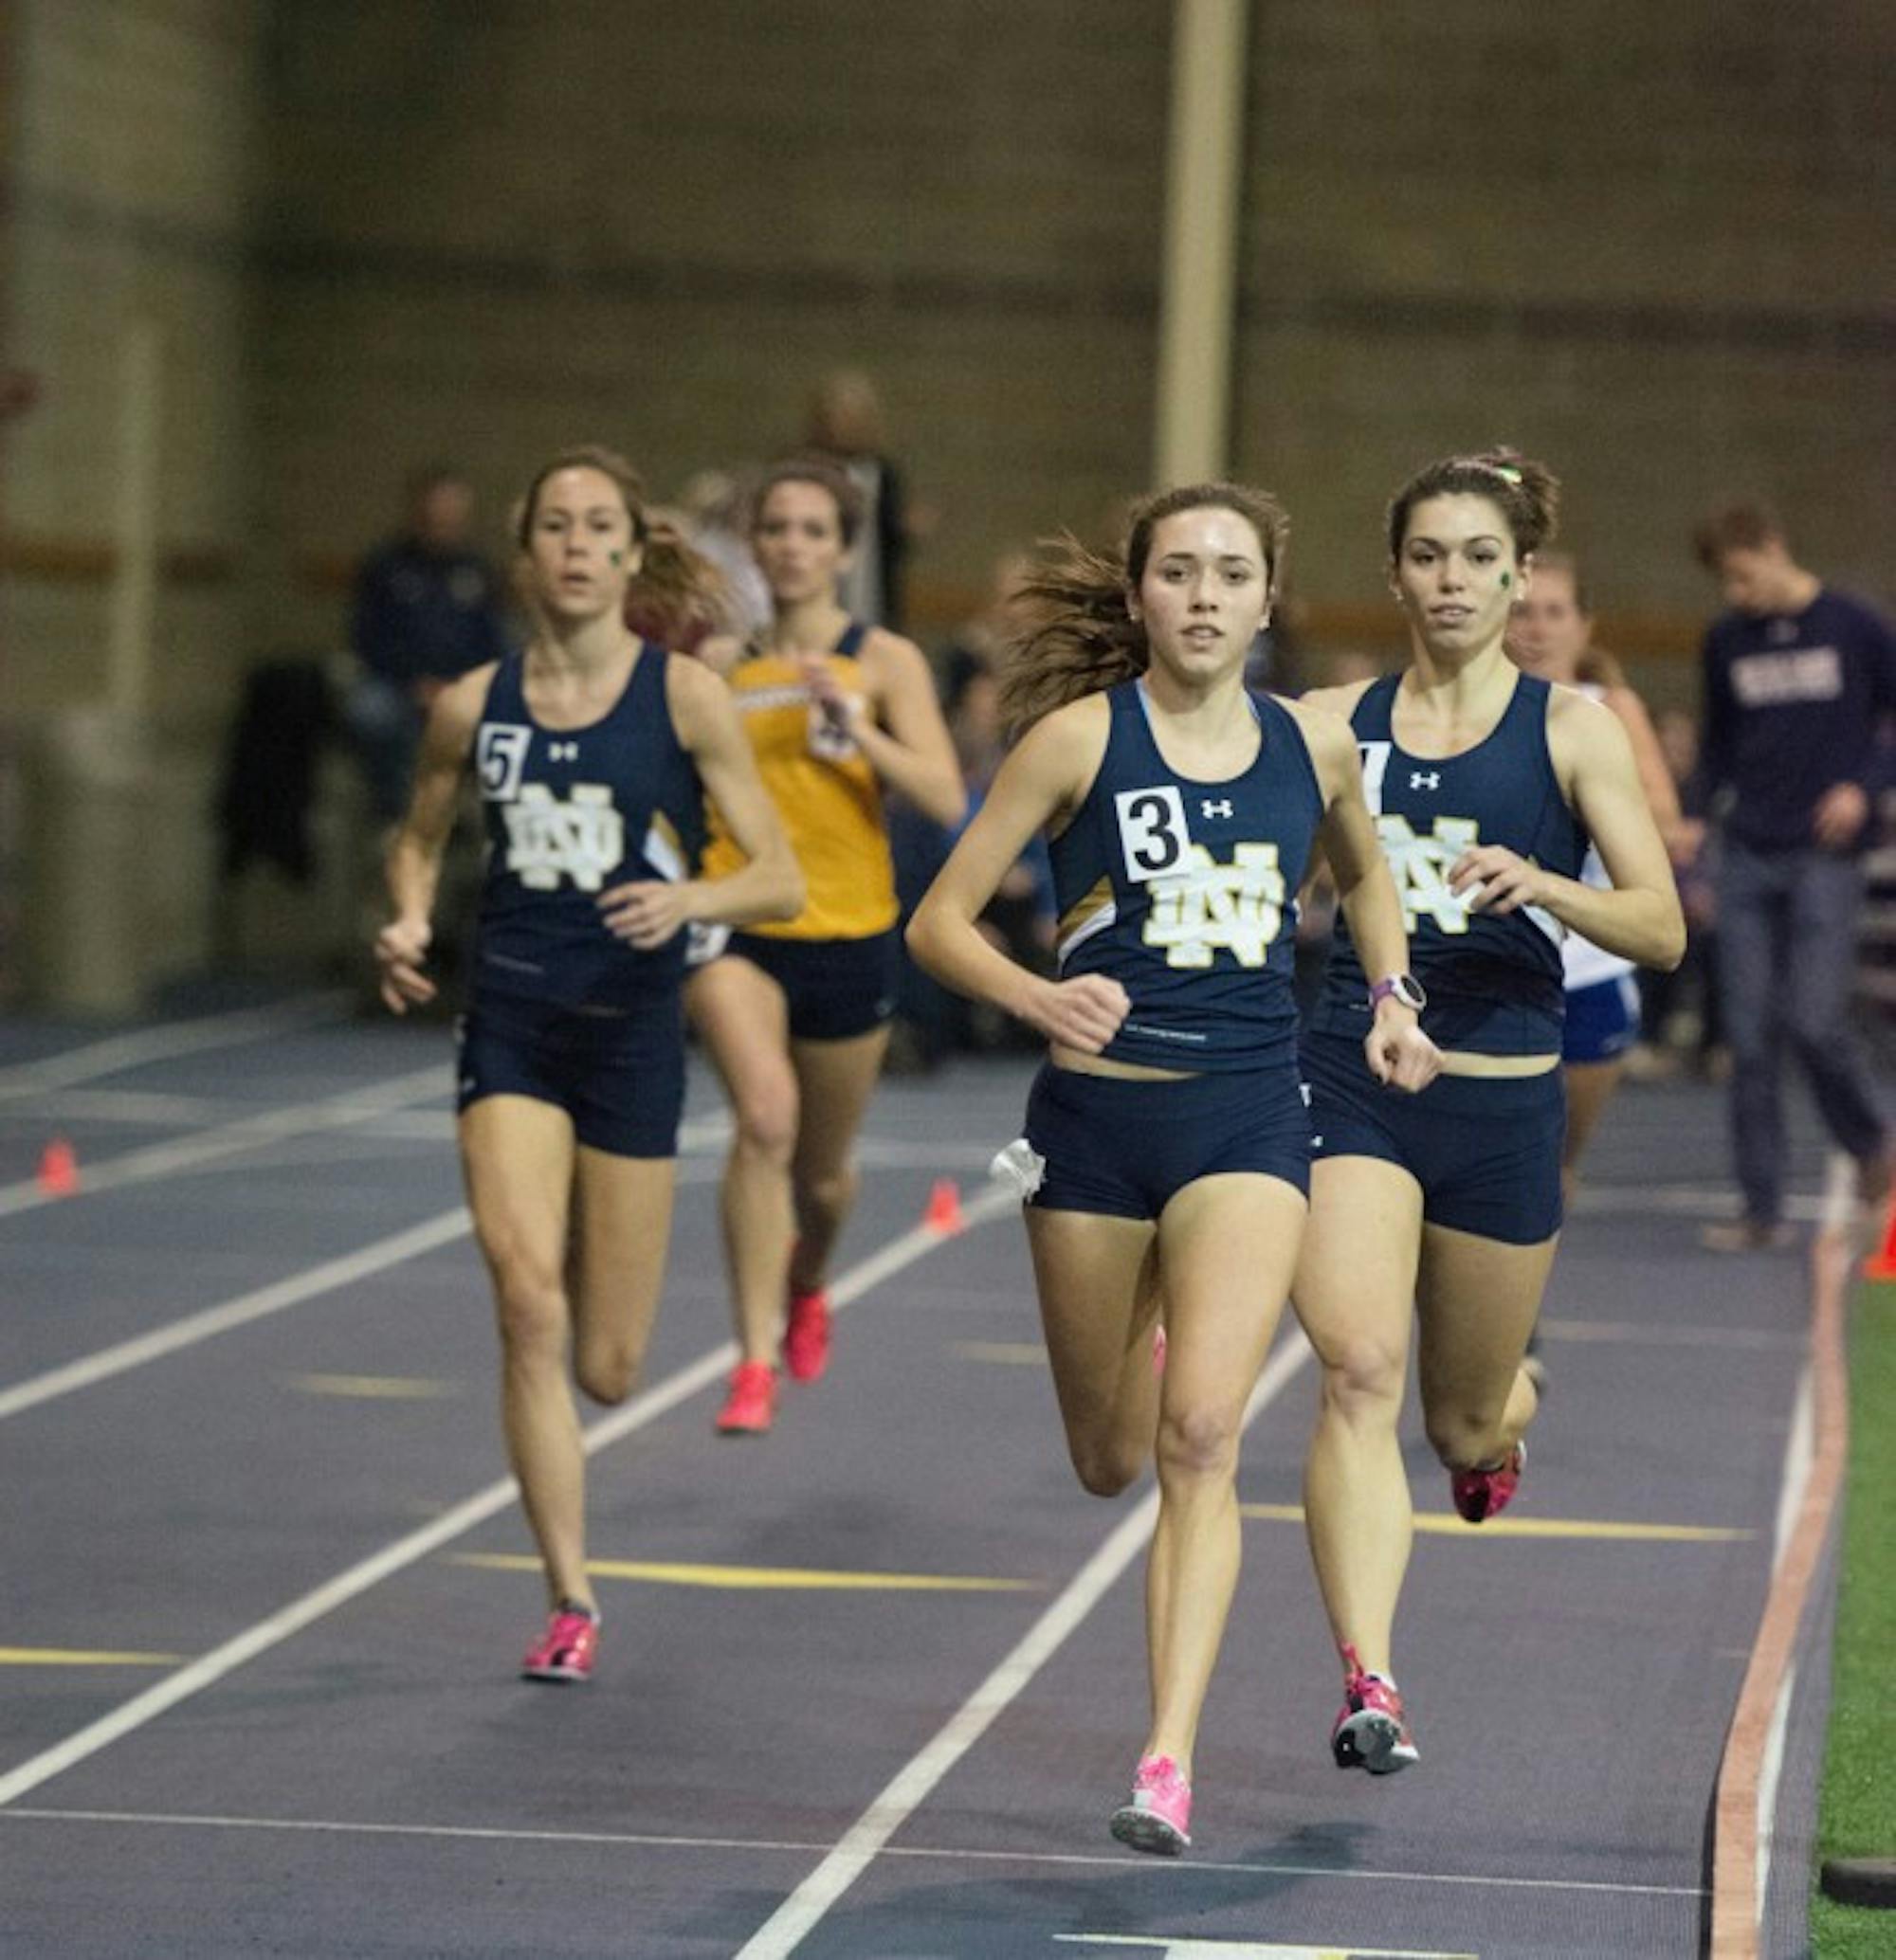 Irish senior Danielle Aragon, center, leads a pack of runners during the Blue & Gold Invitational on Dec. 5, 2014, at Loftus Sports Center. Aragon will compete in the distance medley relay Saturday.